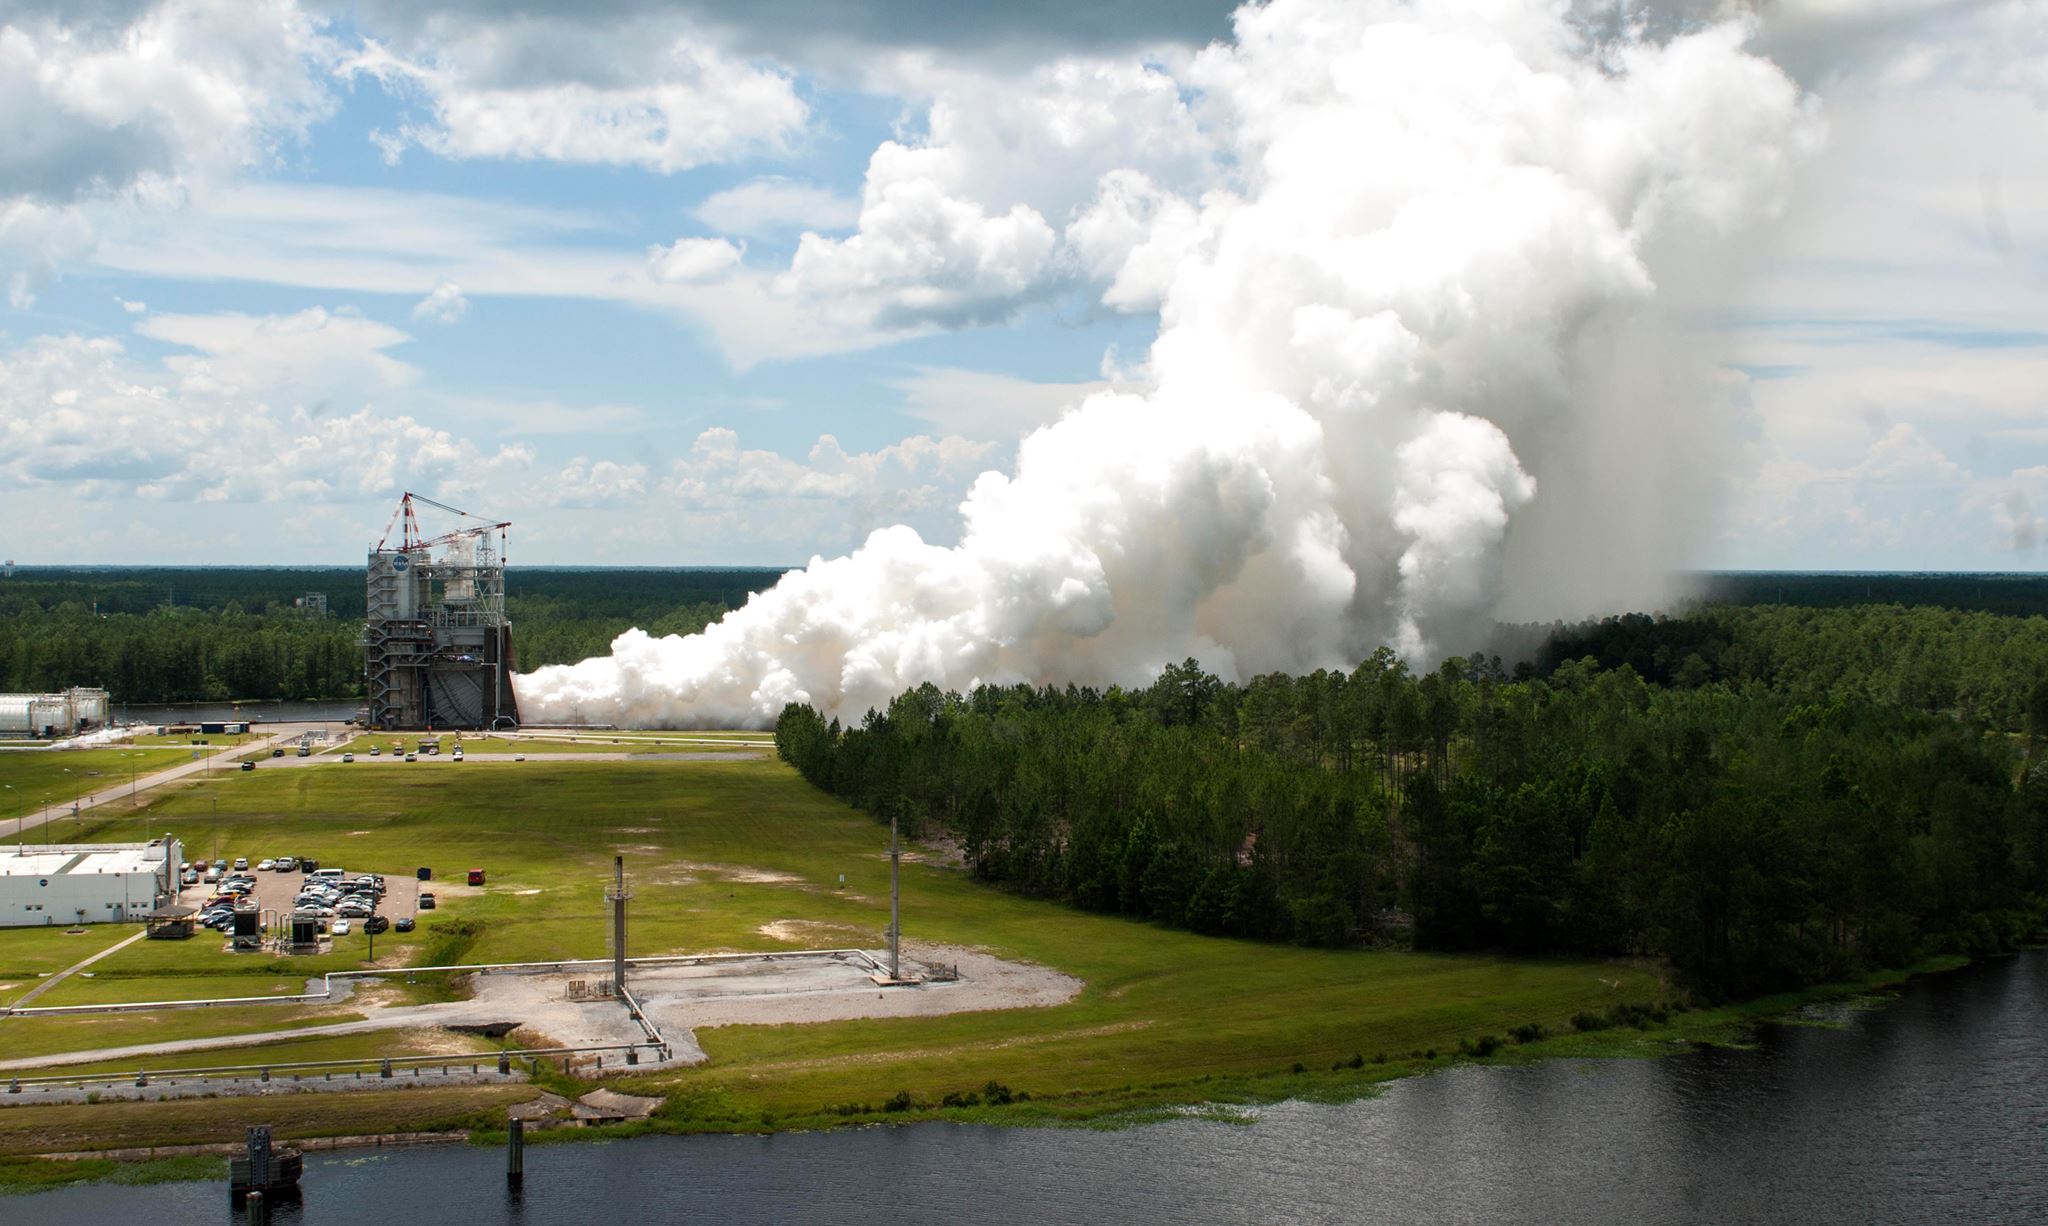 The RS-25 engine fires up at the beginning of a 500-second test June 11 at NASA's Stennis Space Center near Bay St. Louis, Mississippi. Four RS-25 engines will power the core stage of NASA's new rocket, the Space Launch System. Credits: NASA/Stennis 